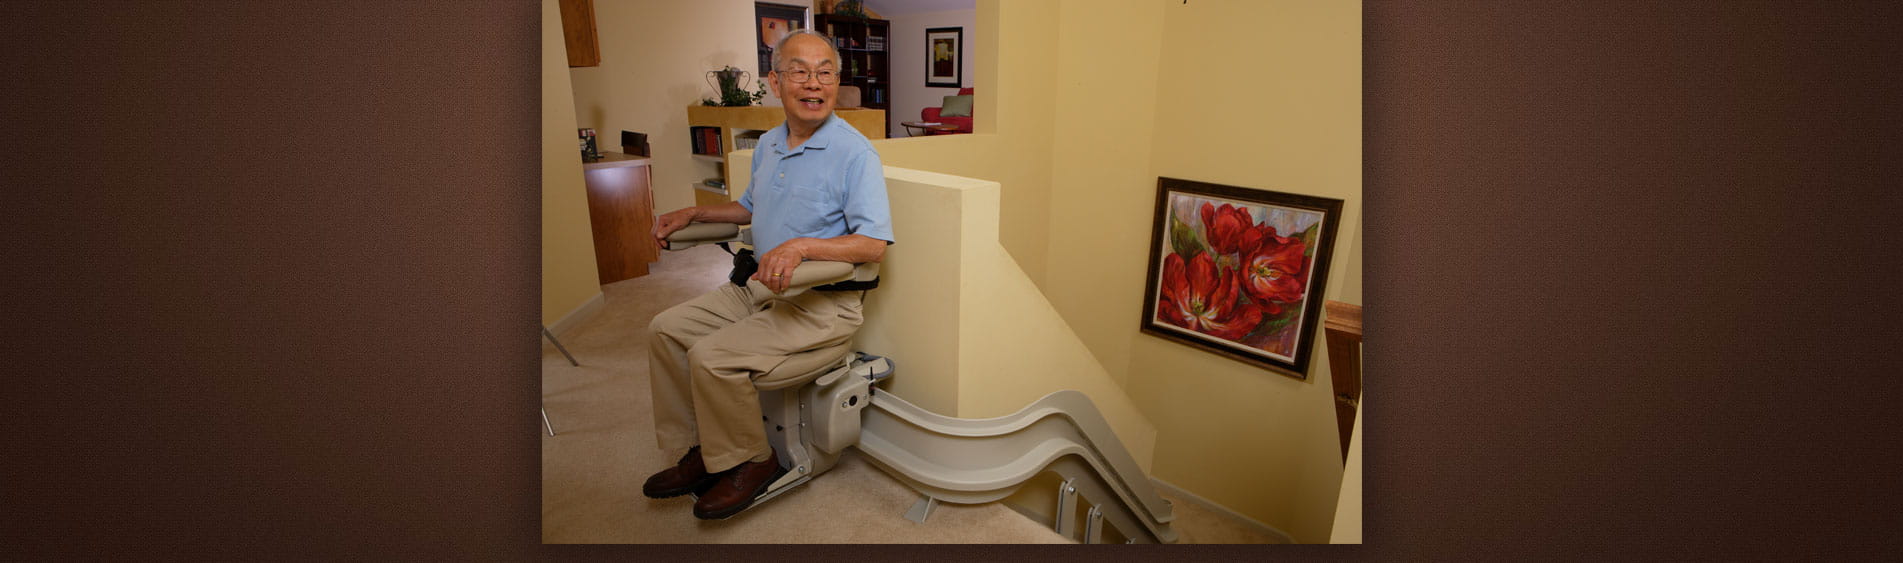 Elderly Man on Stairlifts